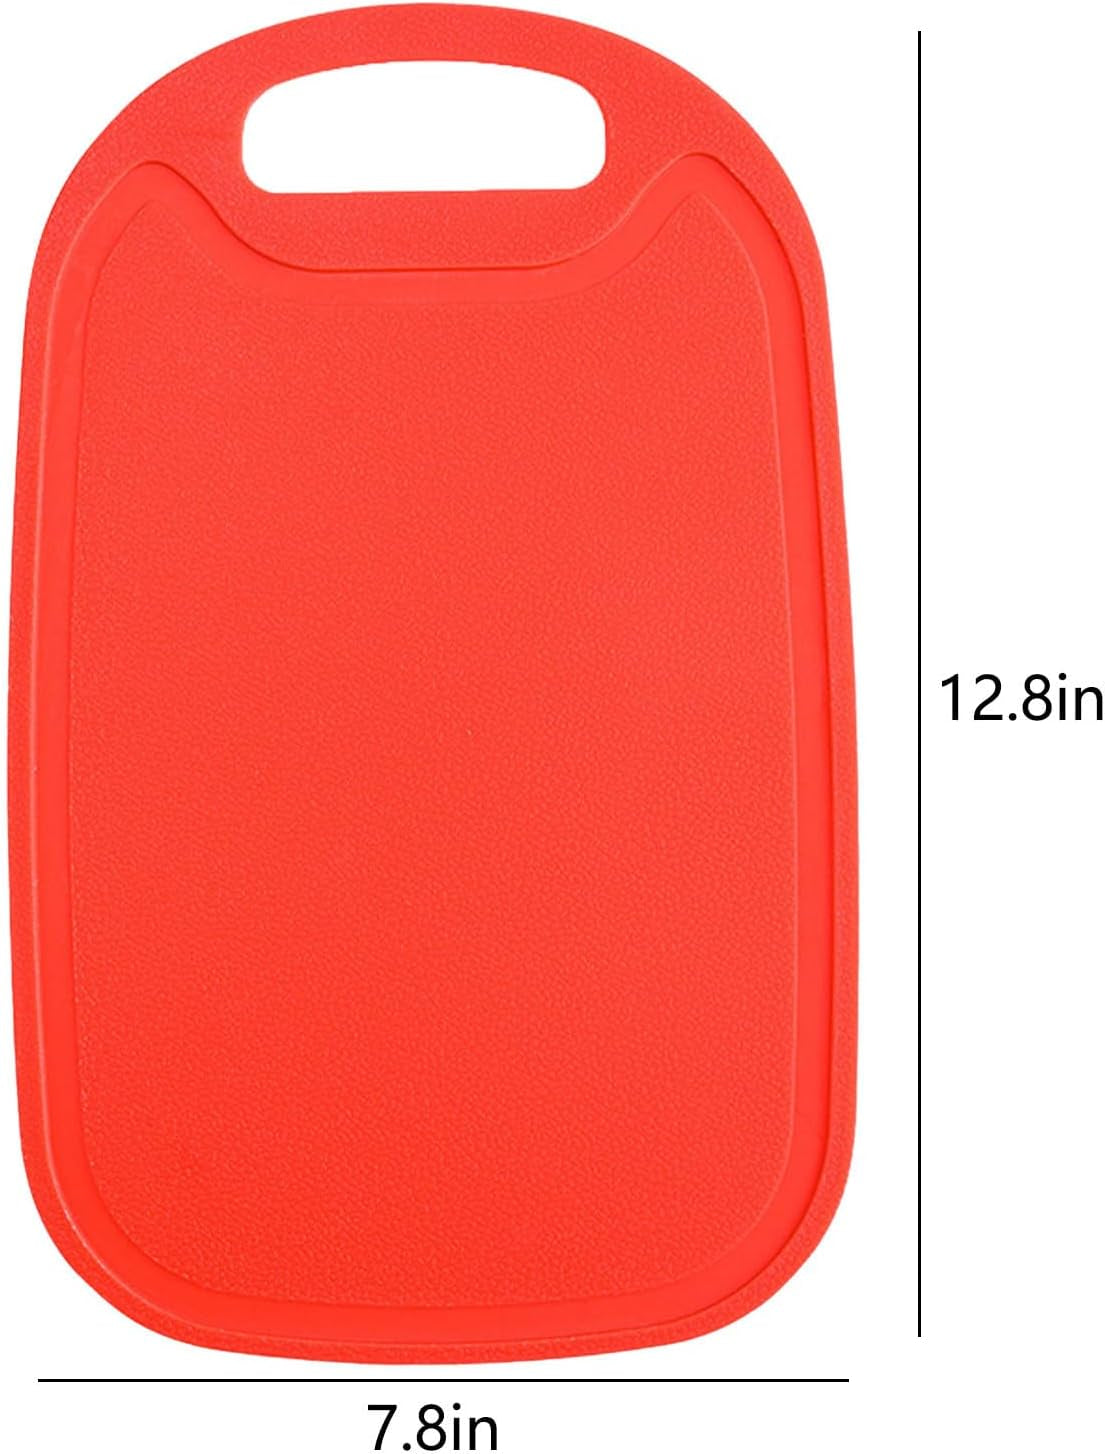 Plastic Cutting Boards for Kitchen Overstock Outlet Dishwasher Safe Double-Sided Design Meat Cutting Board Cutting Board for Meat Easy Grip Handle Non-Slip with Grinding Area Chopping Board  Deal Of The Day Prime Today Only   